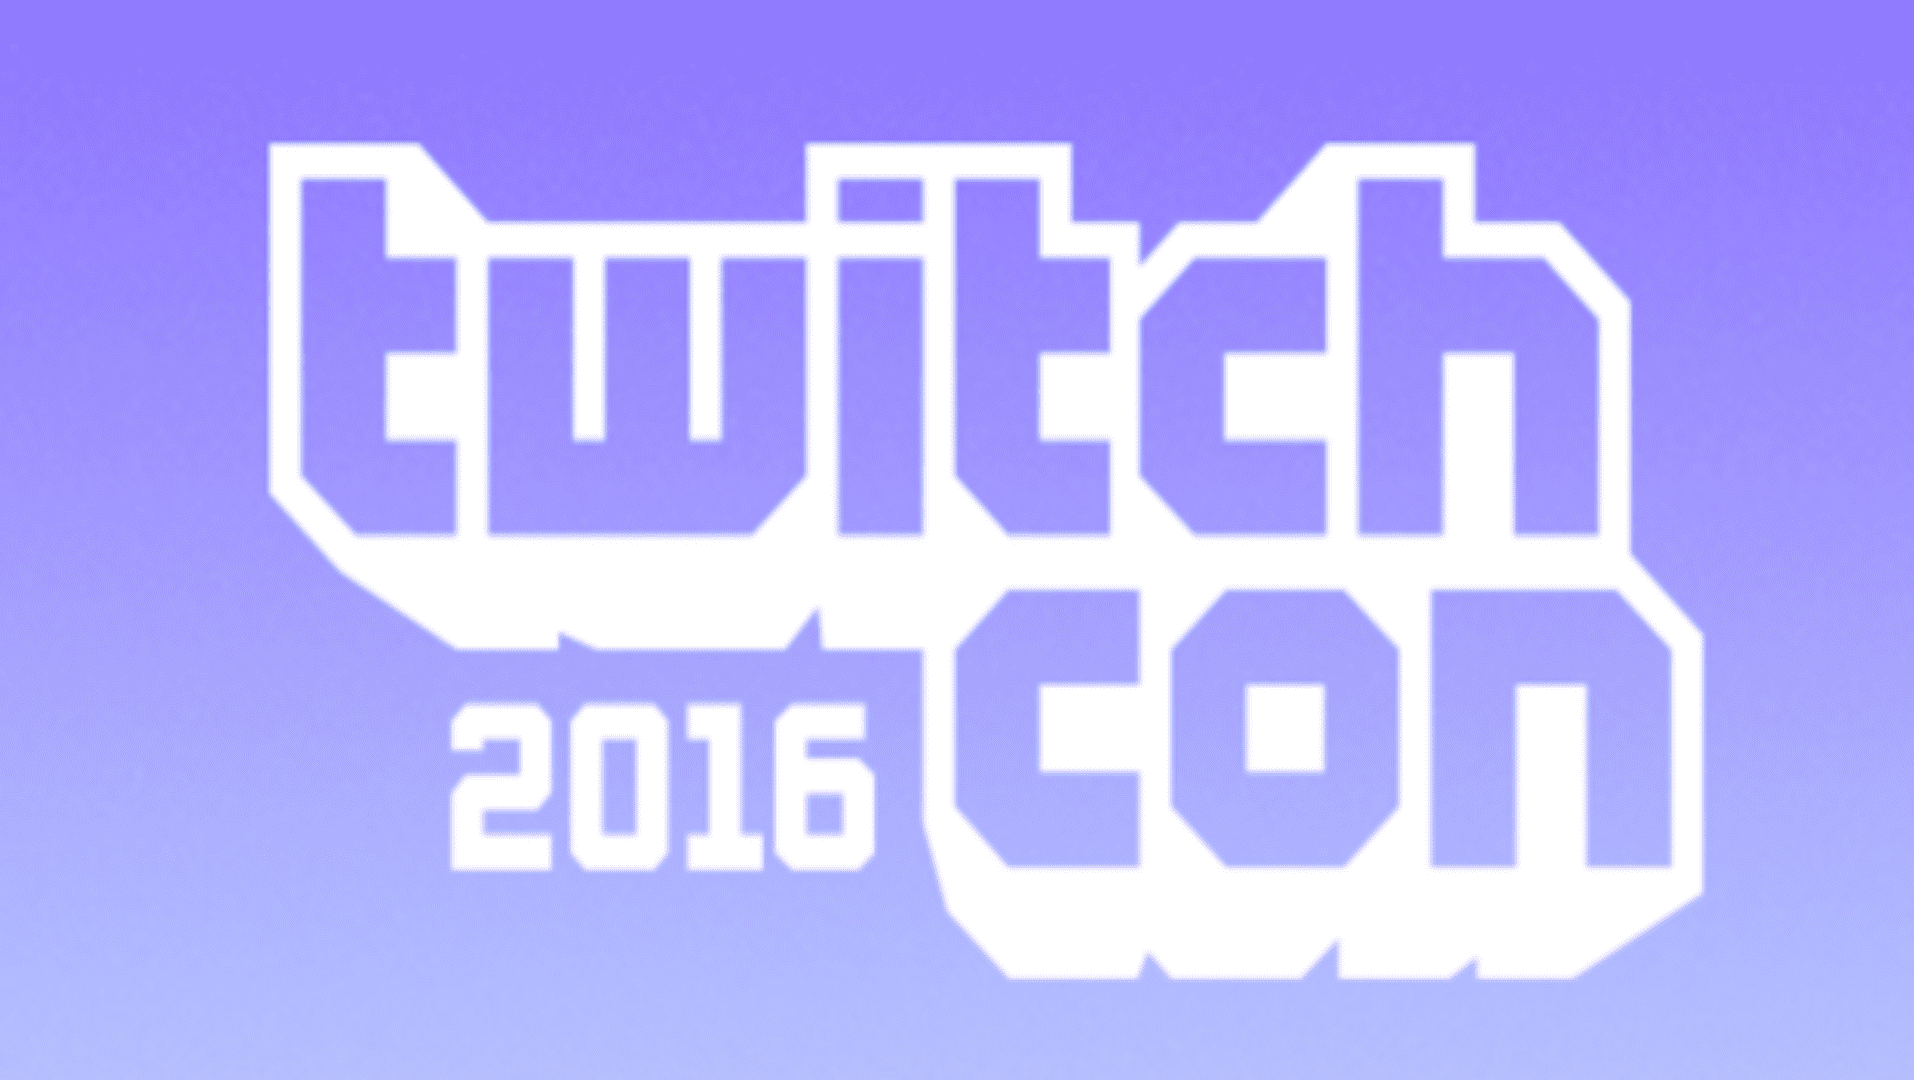 Tom Clancy’s Rainbow Six Siege Livestreaming at TwitchCon 2016 for Charity